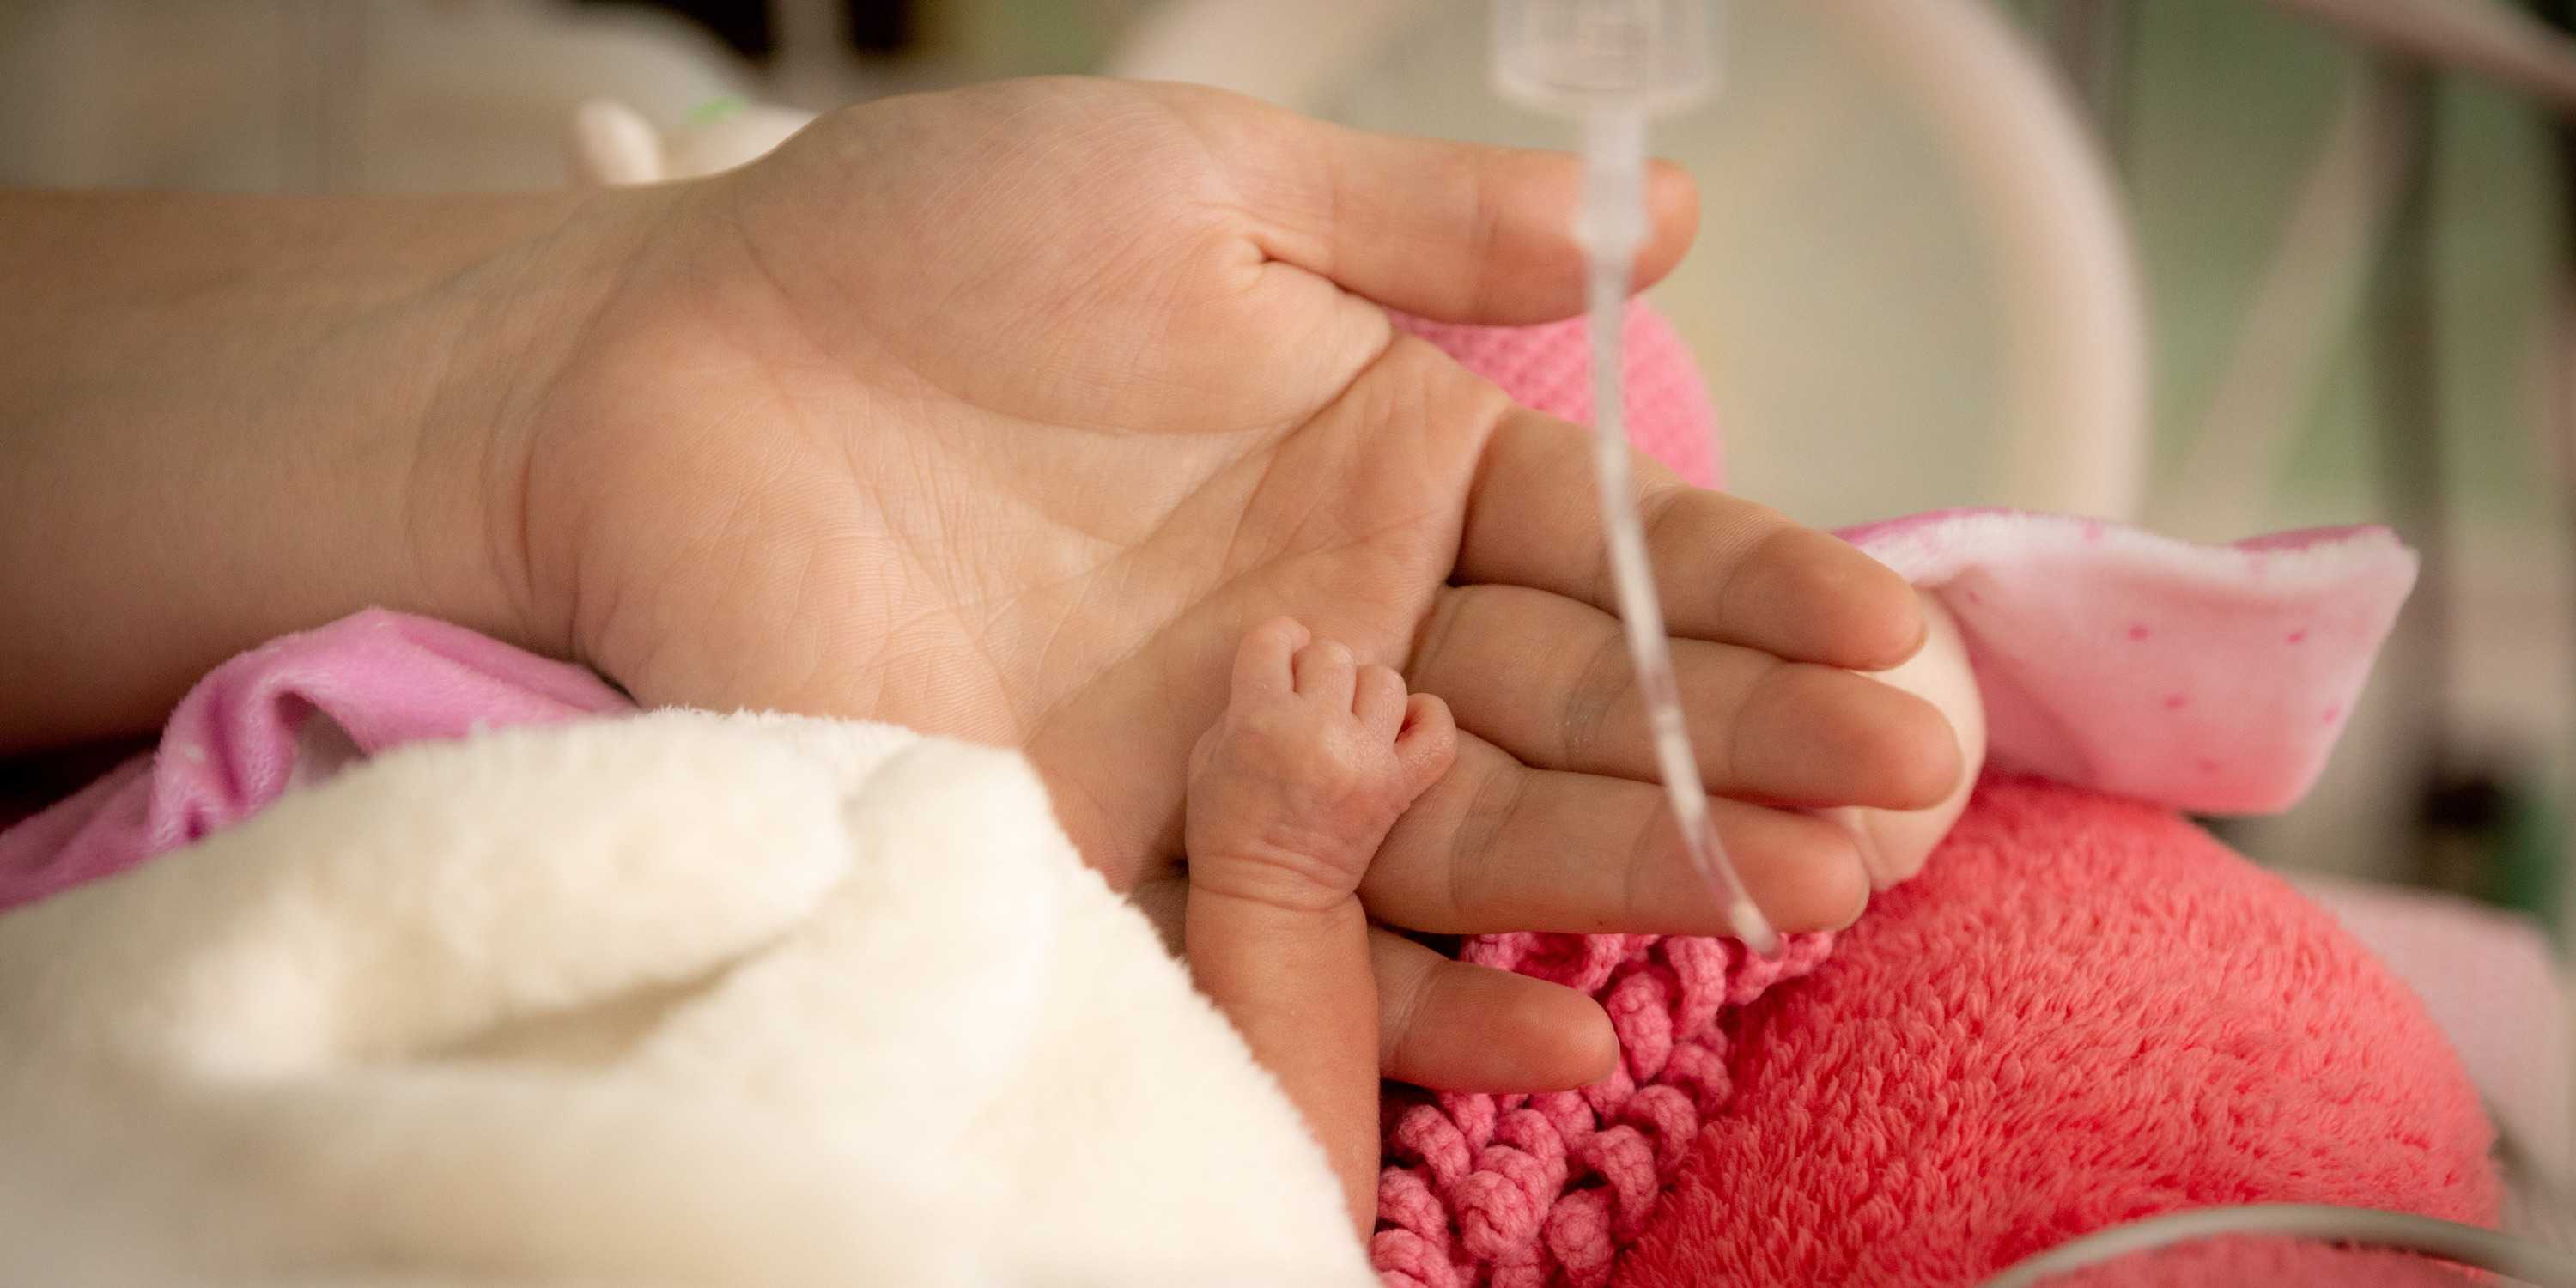 A baby's hand lying in the hand of an andult in an incubator